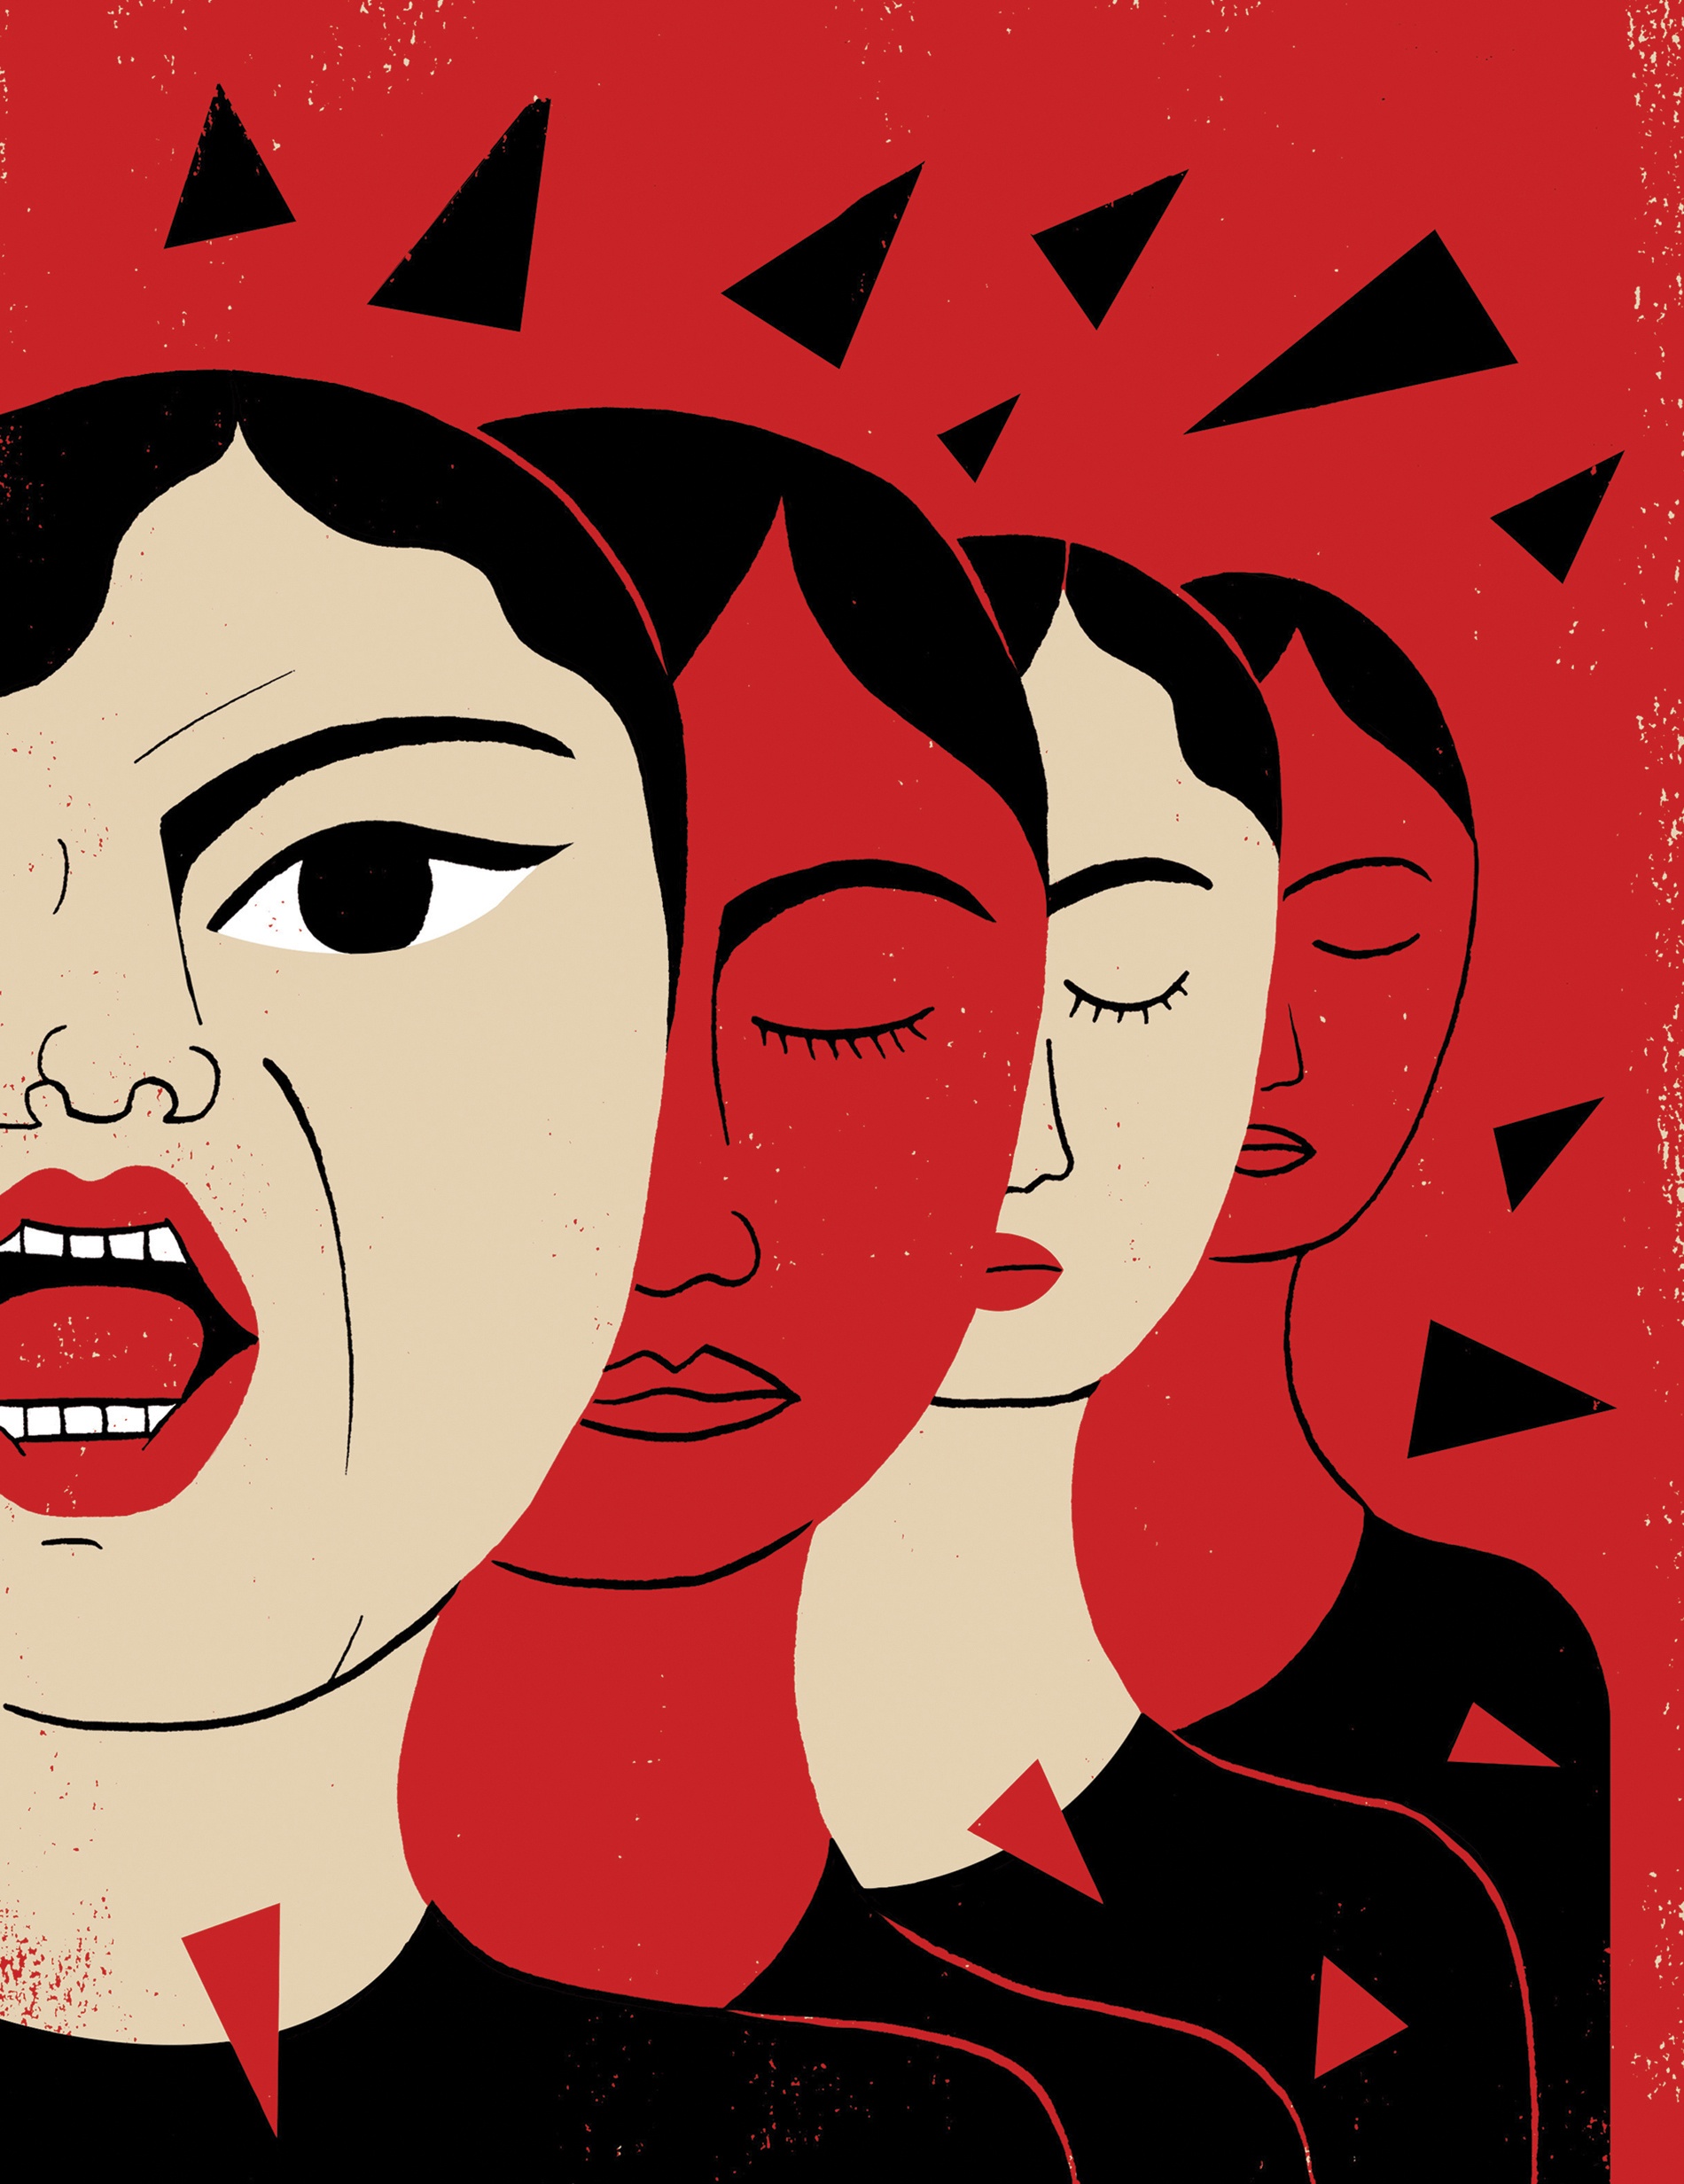 illustration of women speaking out